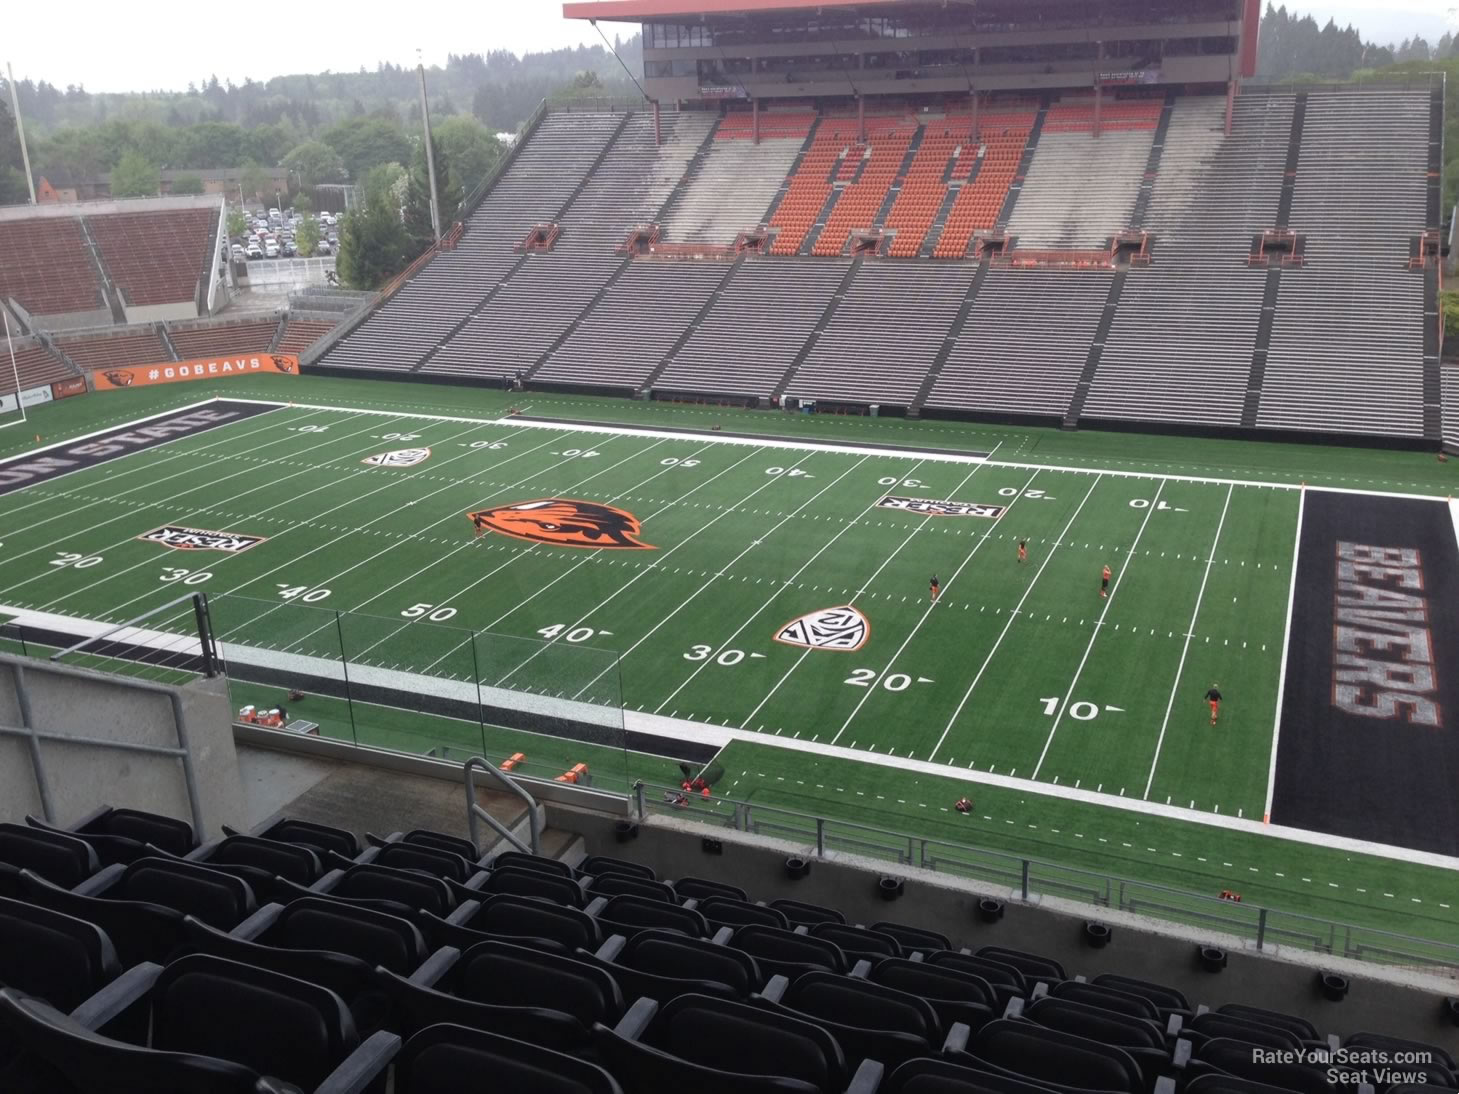 section 216, row 16 seat view  - reser stadium